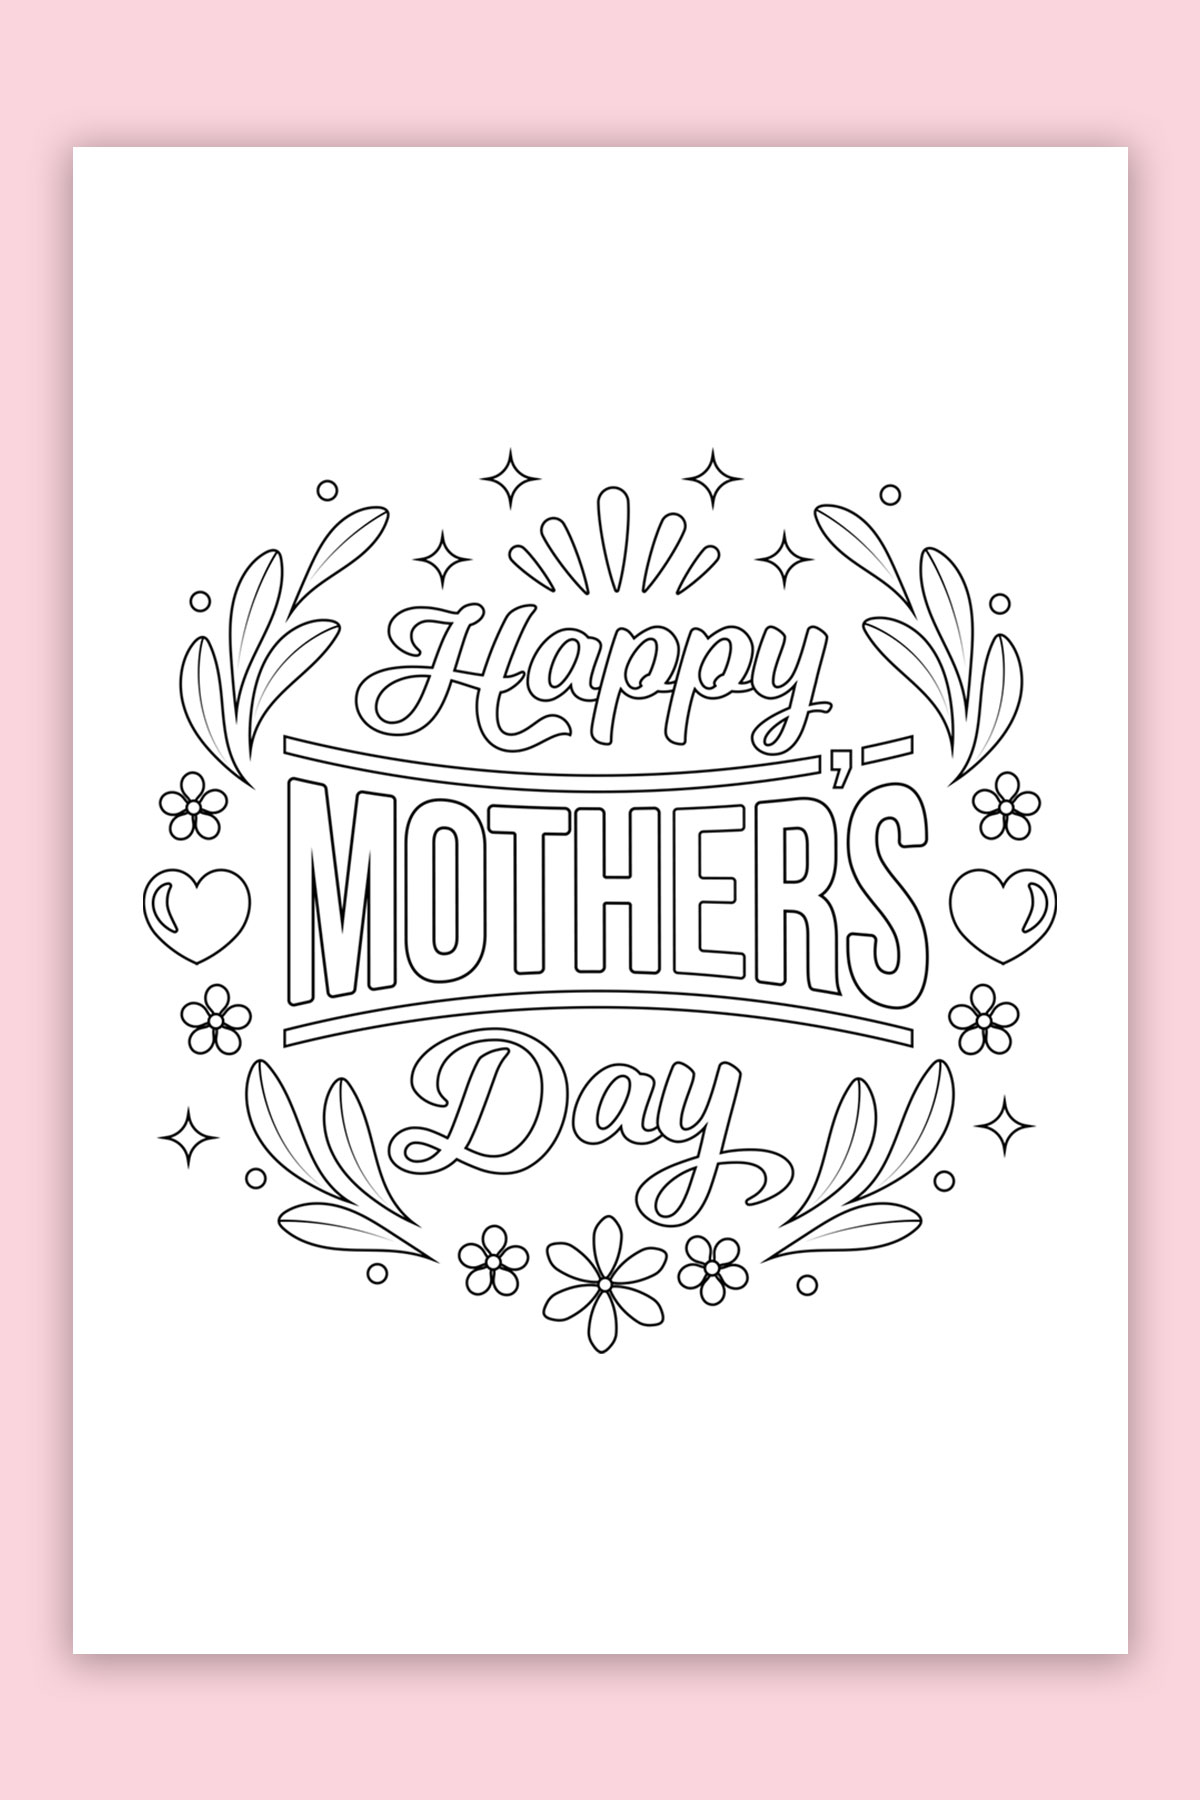 This is the picture of one of the free printable Mother's Day cards to color. This card says Happy Mother's Day and is surrounded by flowers, hearts, and flourishes.